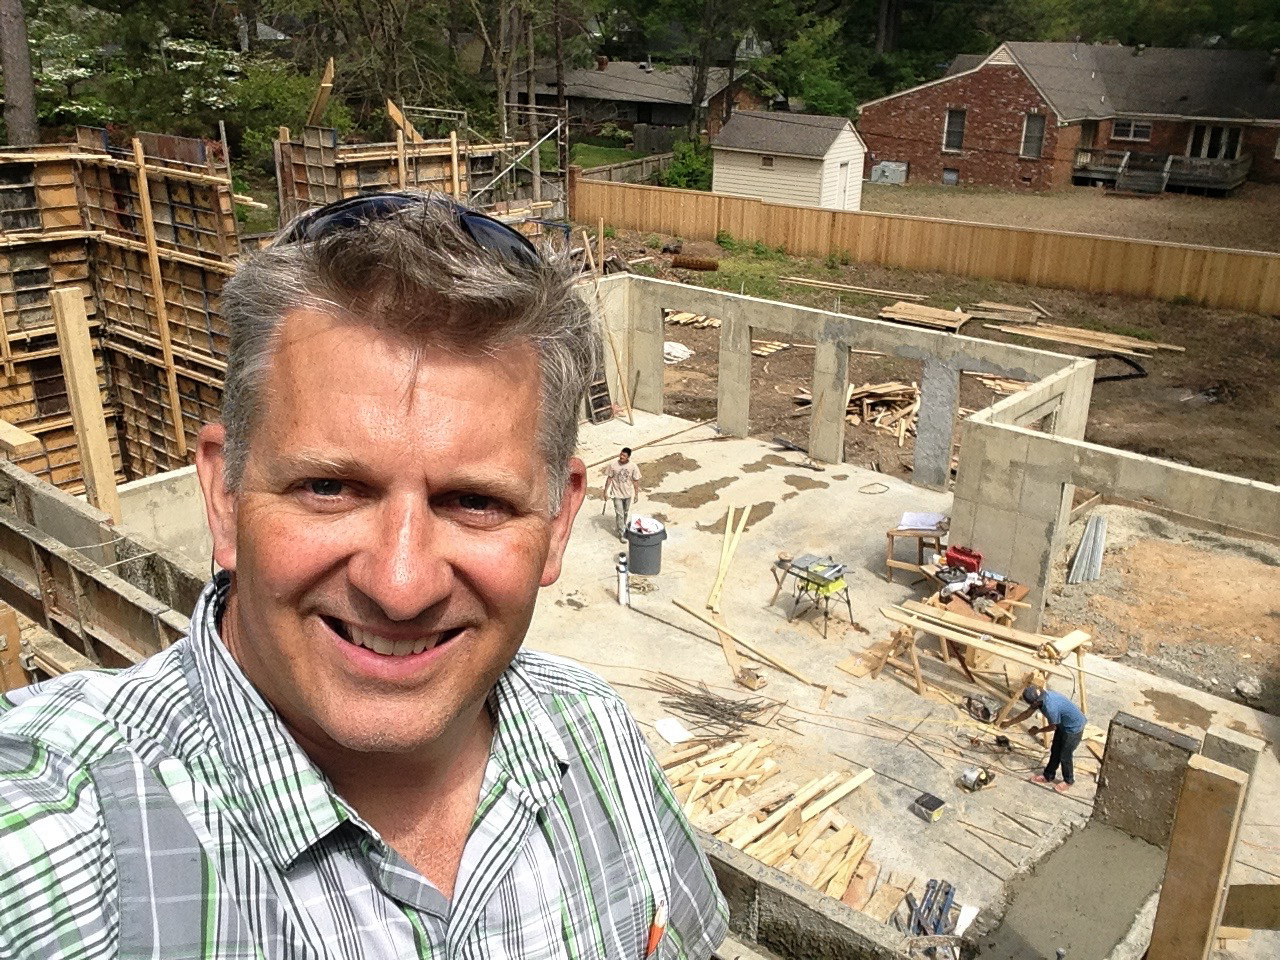 Eric Tabor and his company, The Elm Group, are focusing on constructing the exterior walls of new homes with concrete. His goal is to provide affordable structures that can resist the most violent extreme weather events.